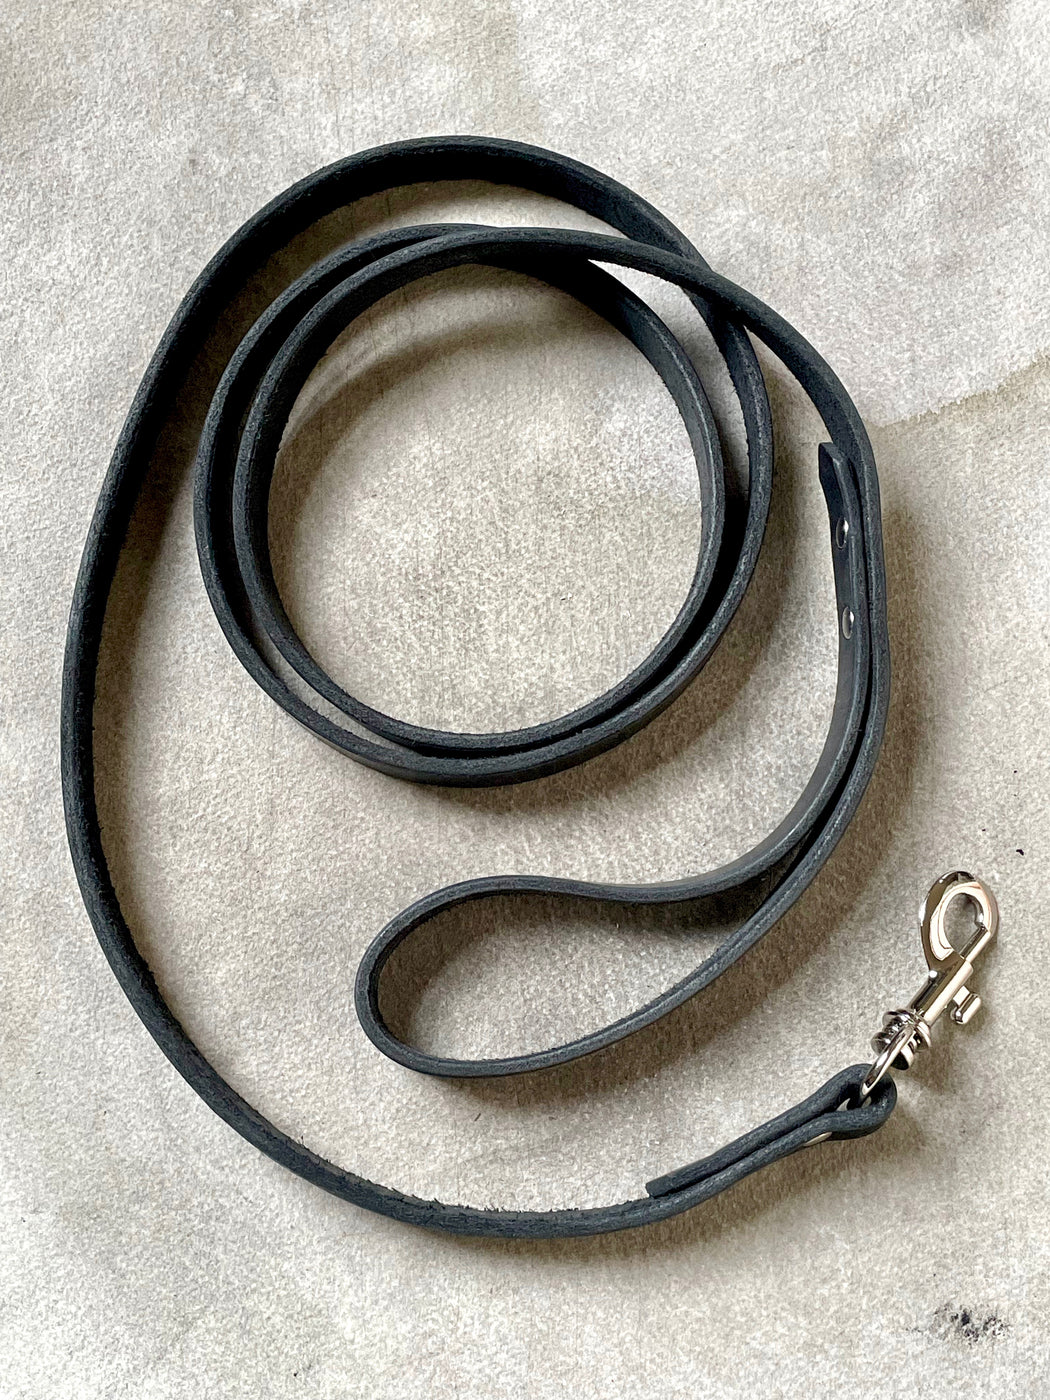 Black Leather Dog Leash by Pike Leather